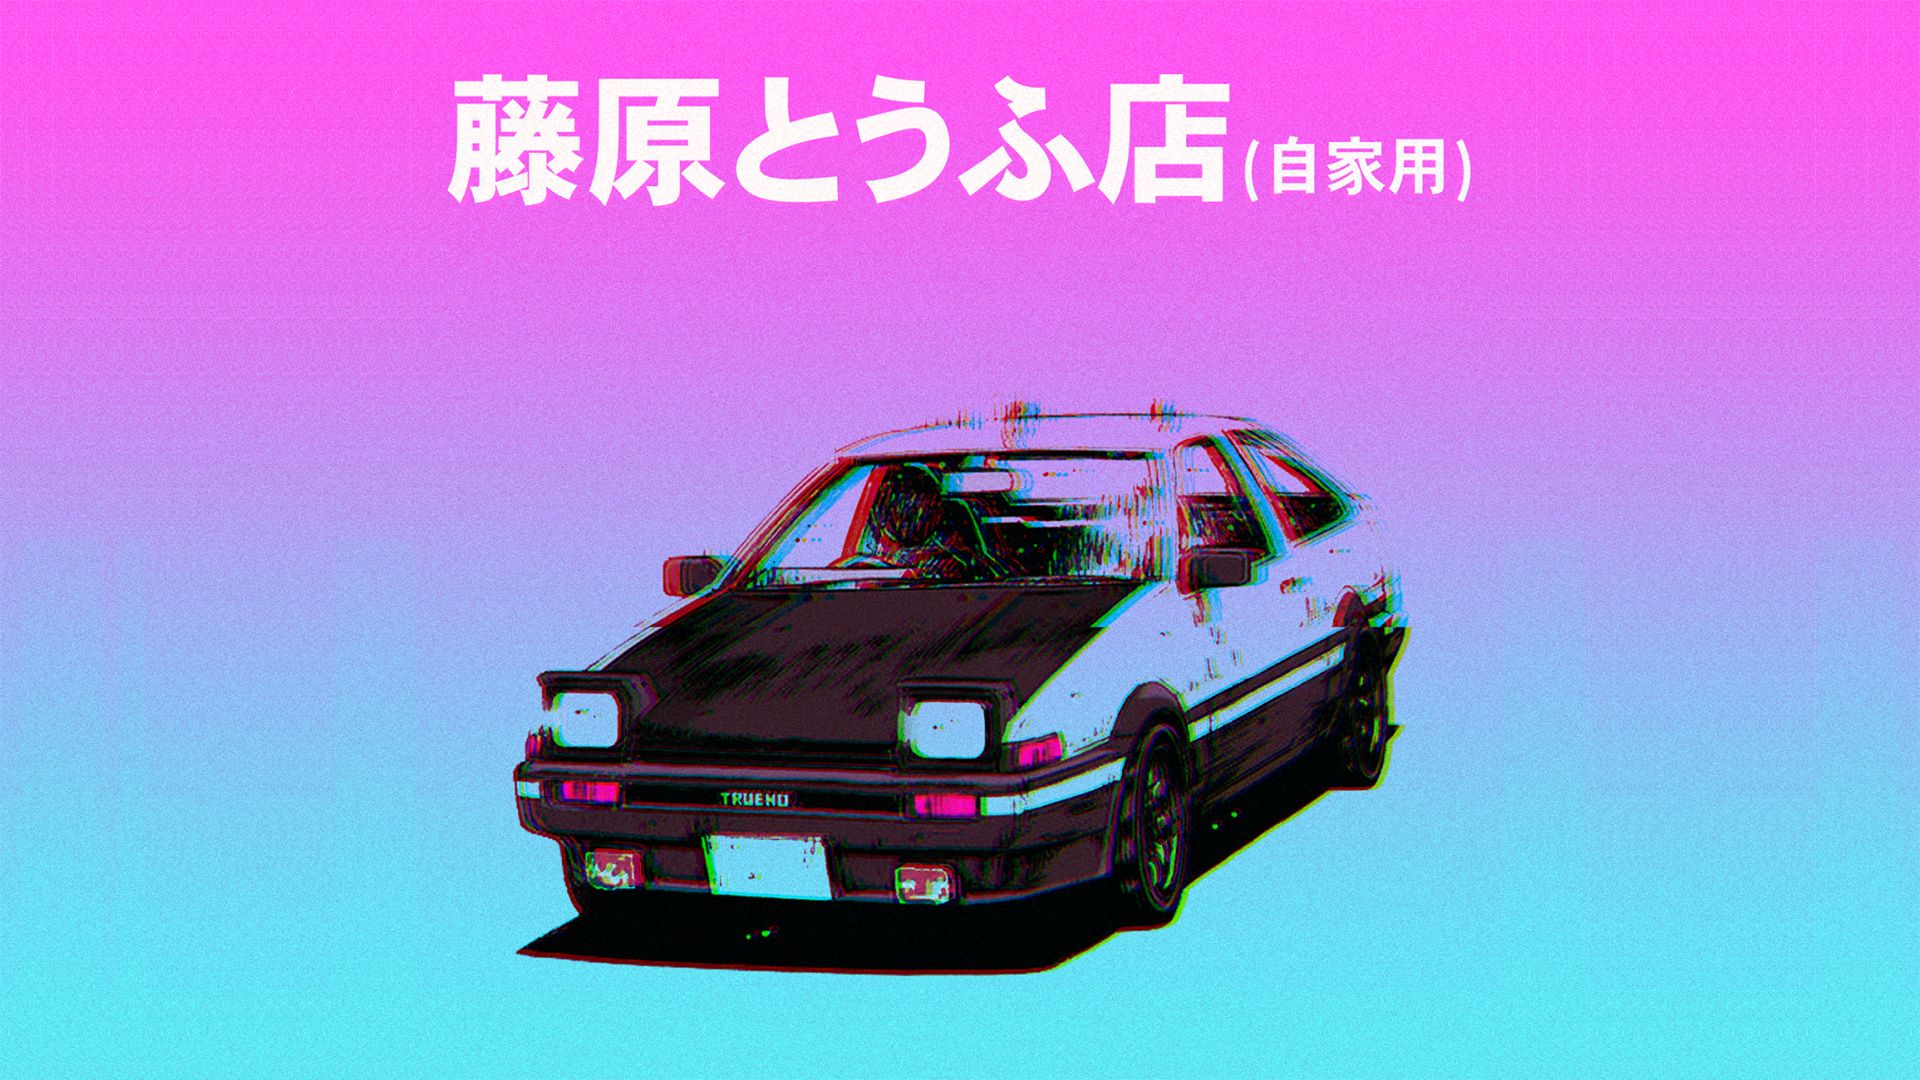 Free download Initial D Vapor Wave Aesthetic 1920x1080